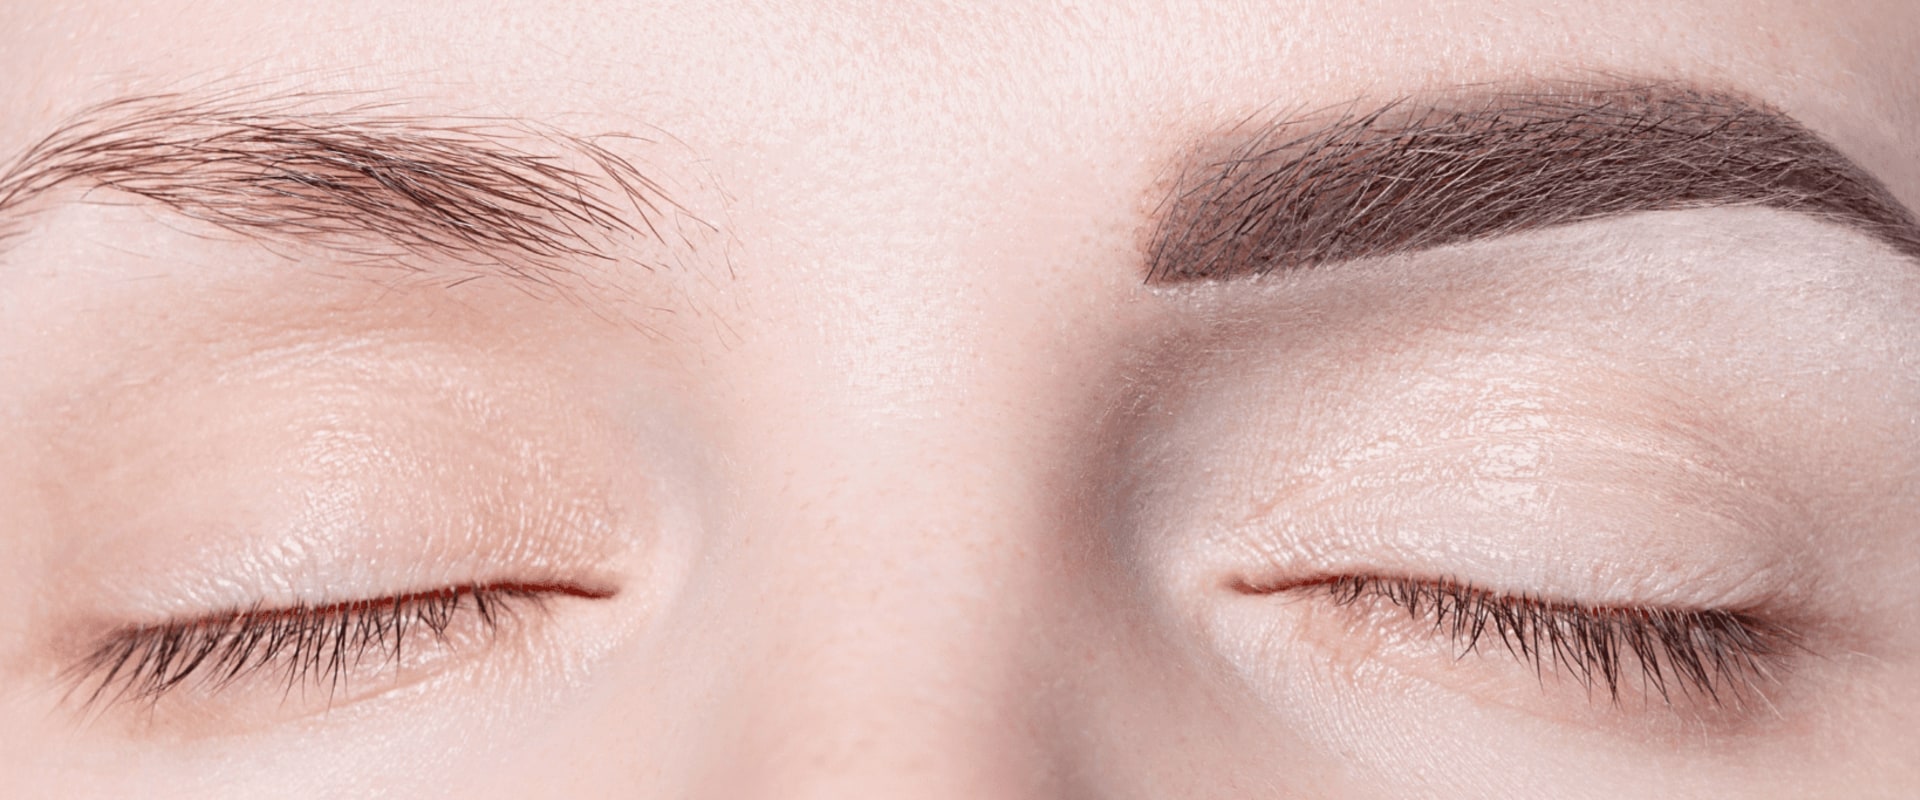 What are the disadvantages of permanent makeup?